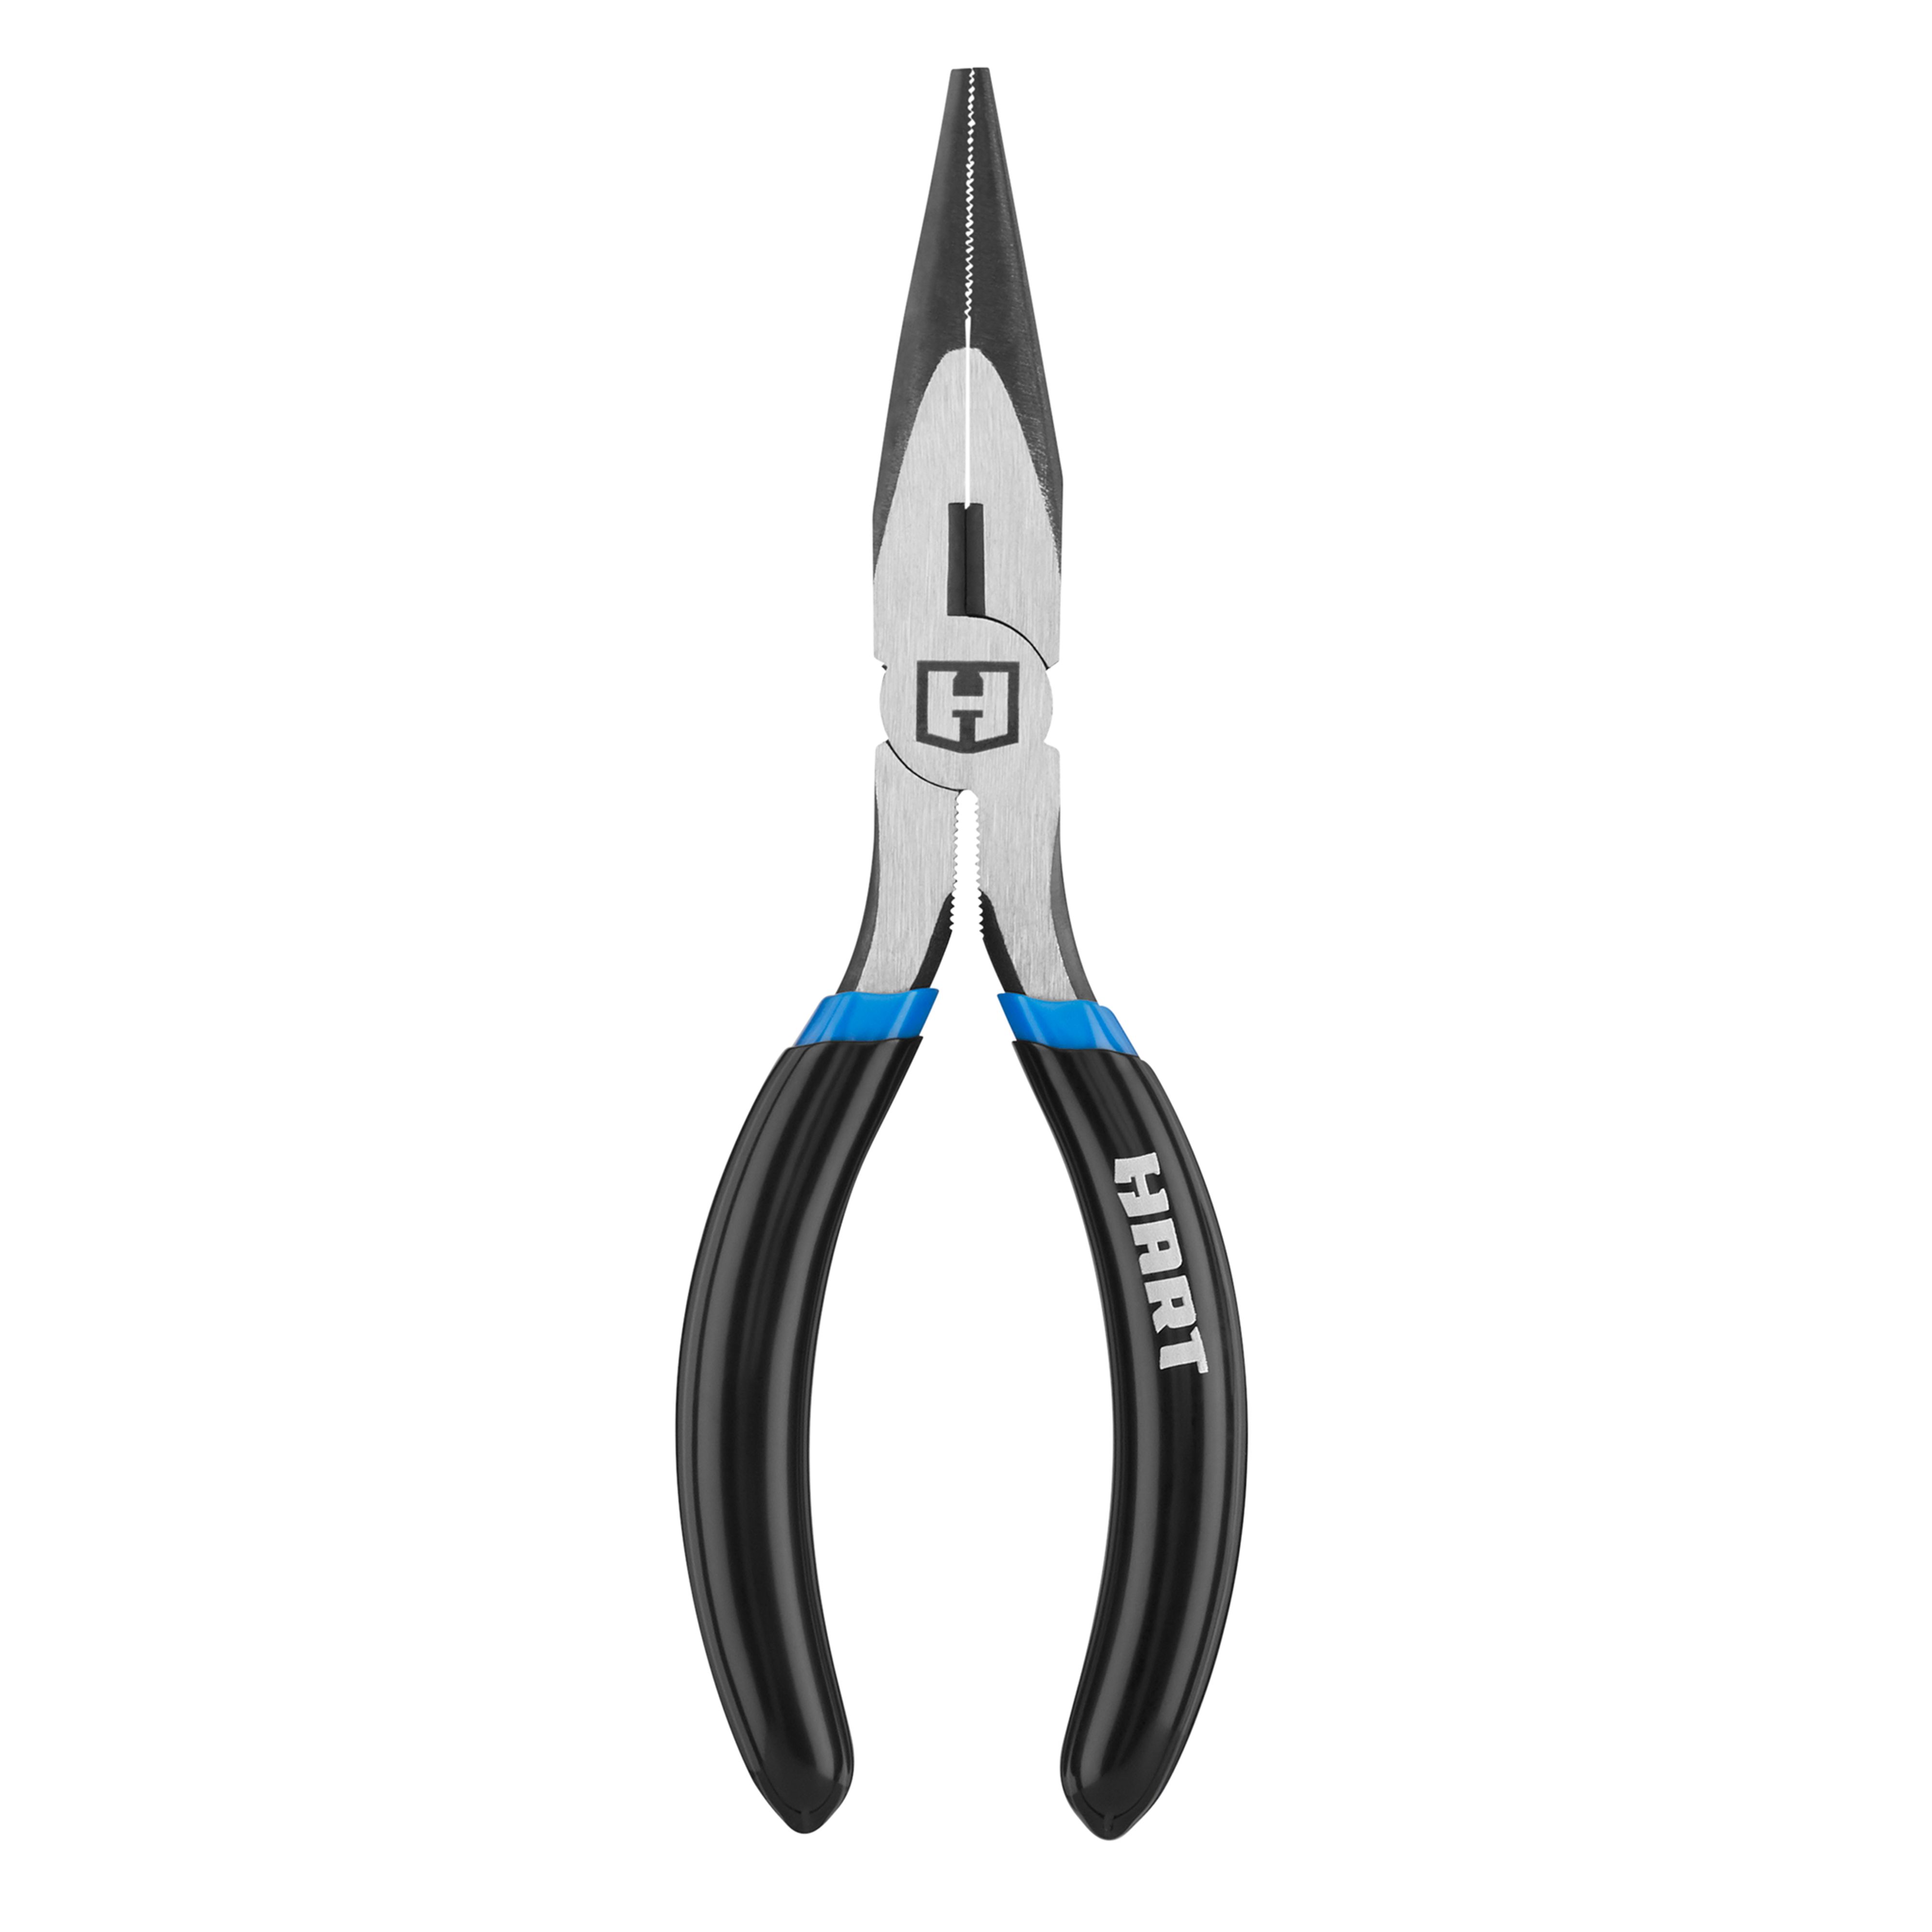 HART 2-Piece Pliers Set, 6-inch Long Nose, 8-inch Slip Joint - image 4 of 11